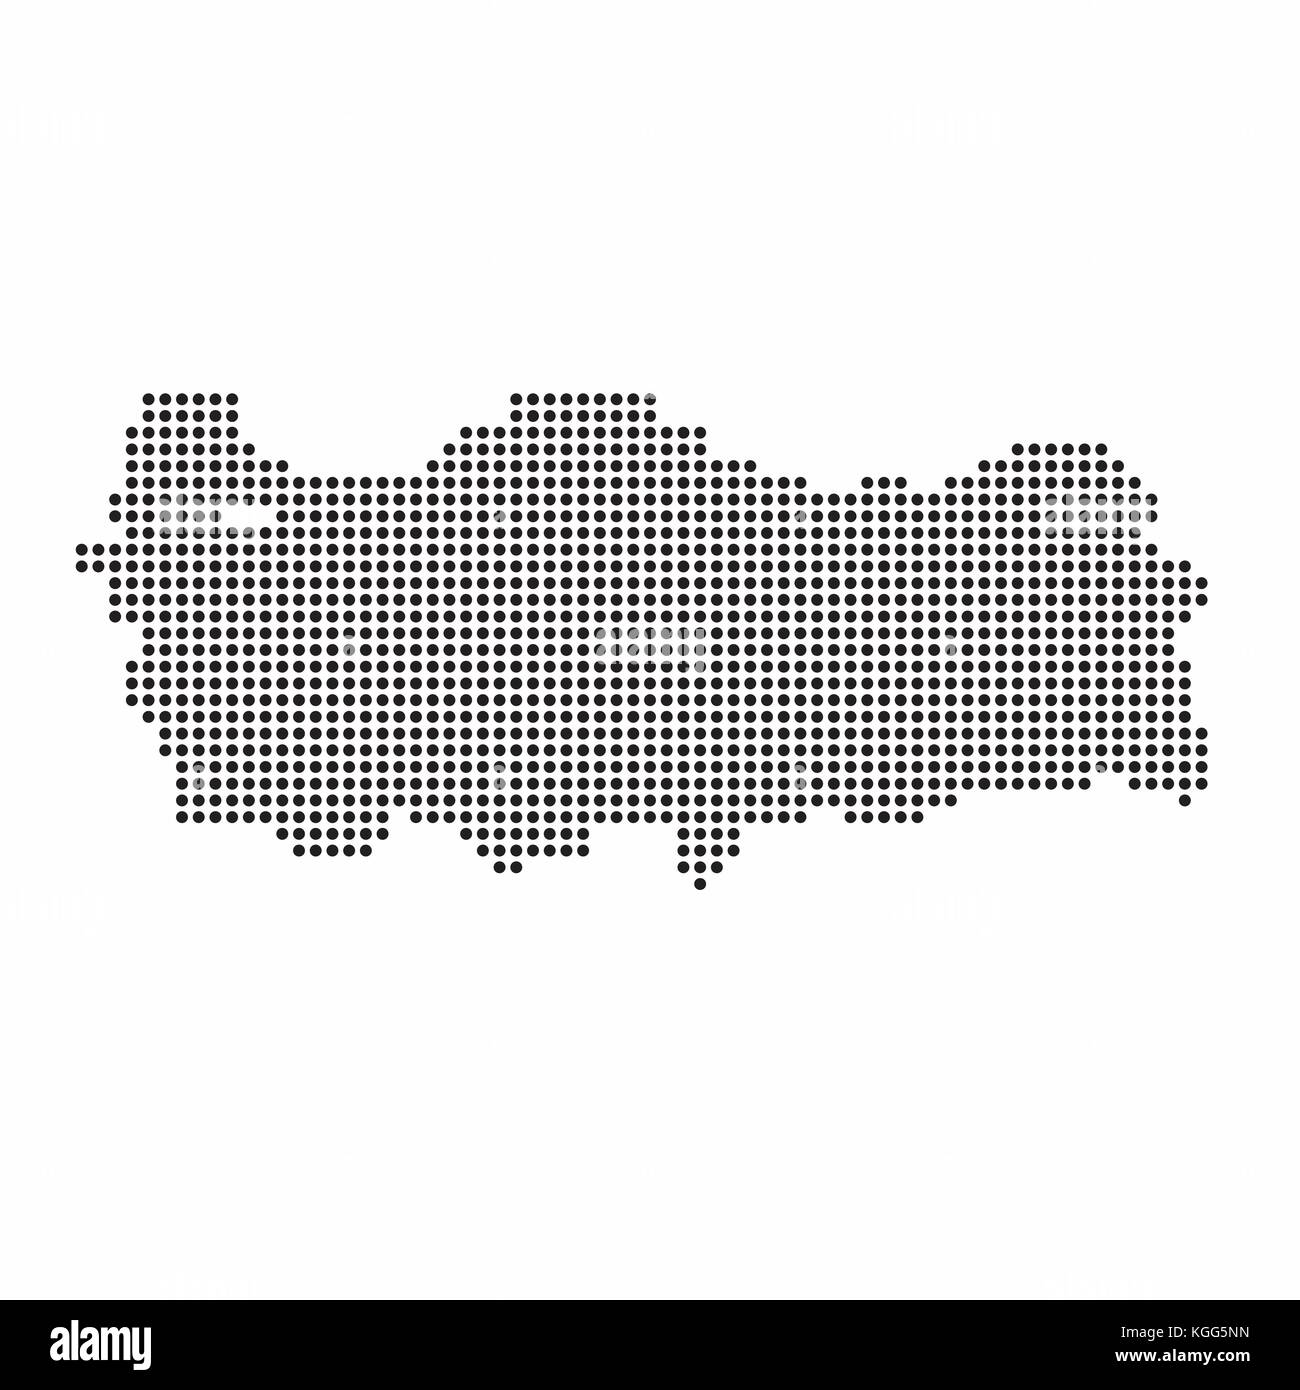 Turkey country map made from abstract halftone dot pattern Stock Vector